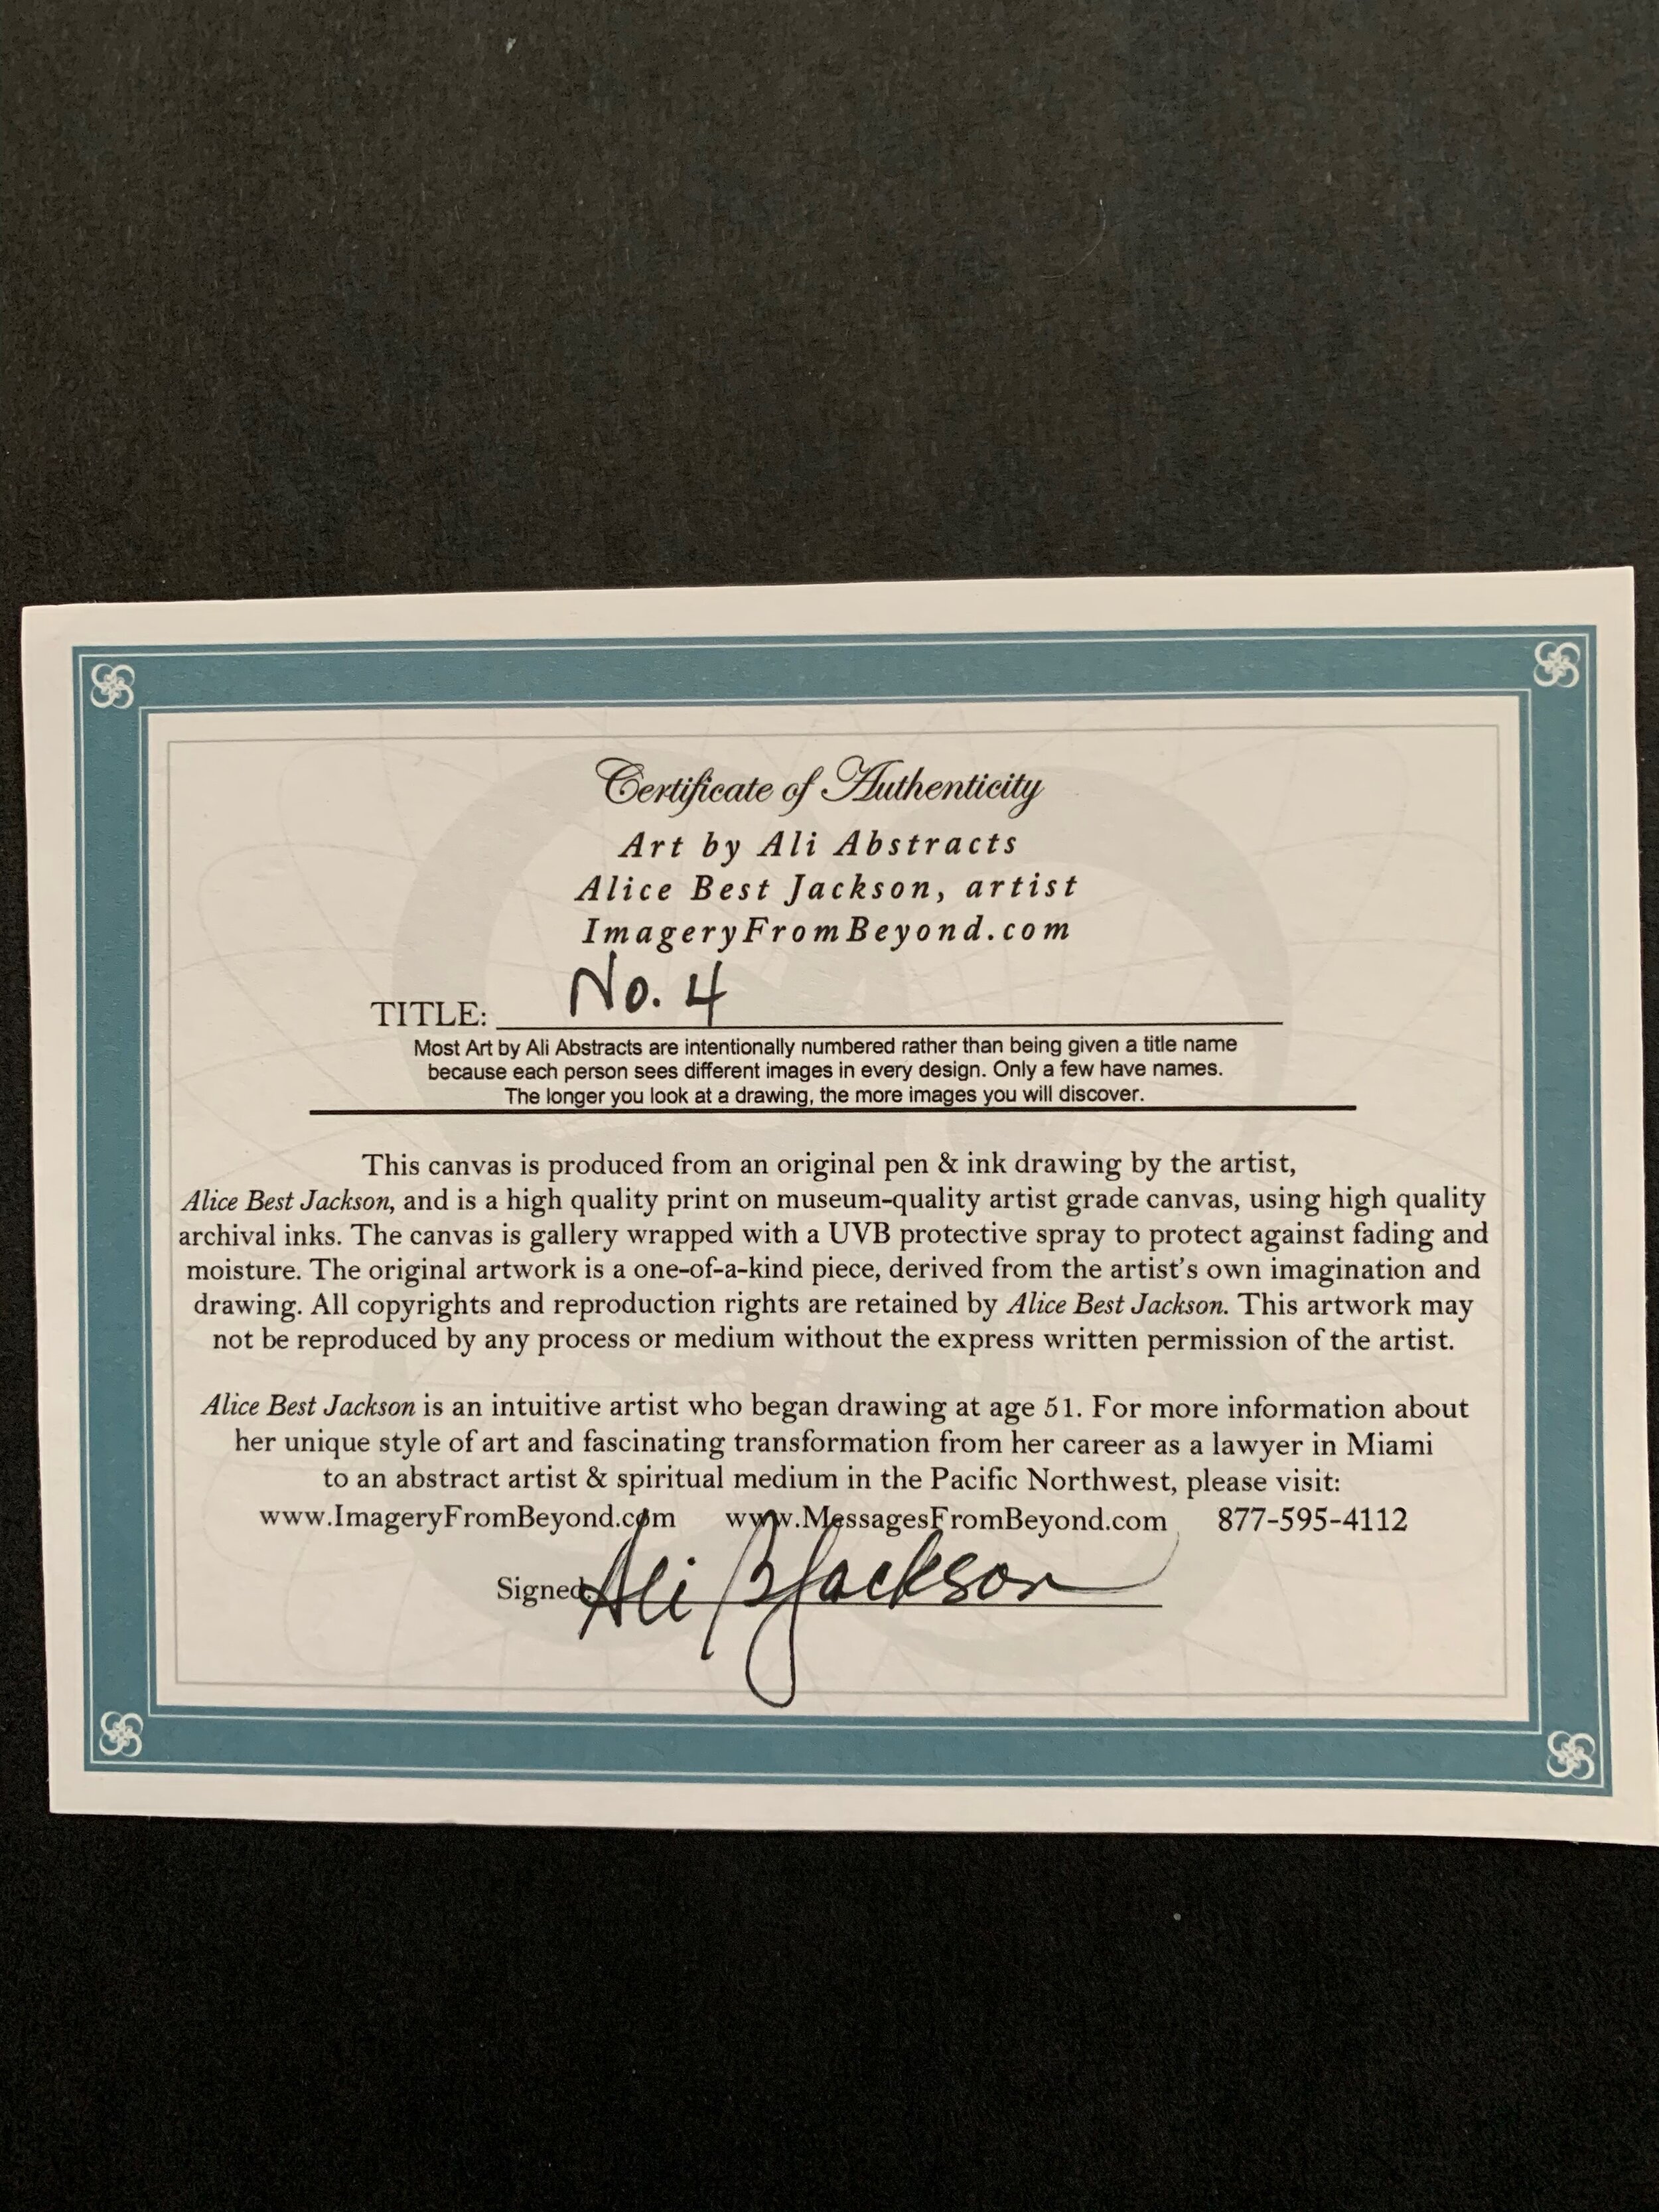 Certificate of Authenticity.jpeg